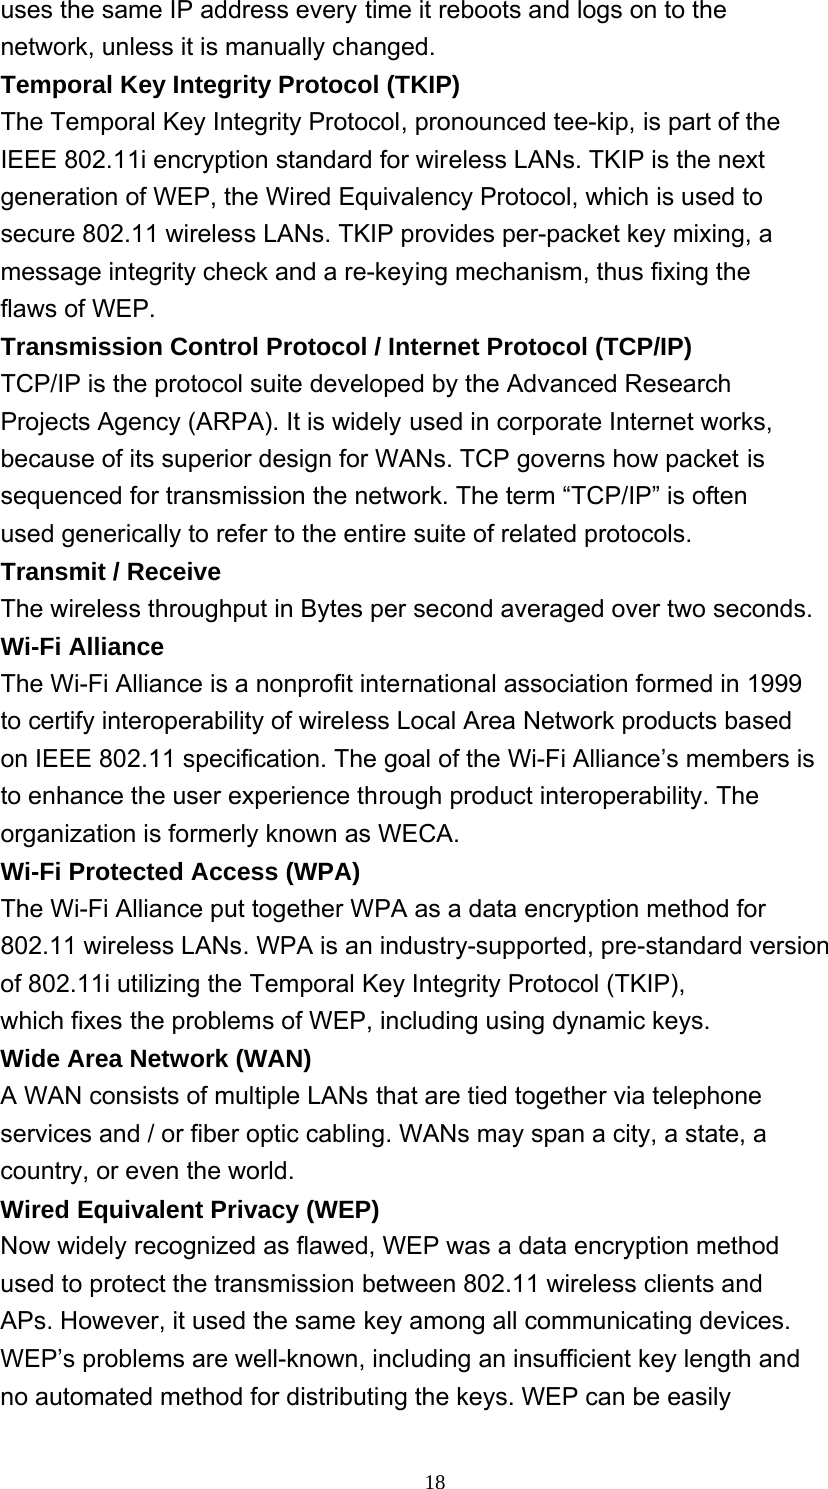 18  uses the same IP address every time it reboots and logs on to the network, unless it is manually changed. Temporal Key Integrity Protocol (TKIP) The Temporal Key Integrity Protocol, pronounced tee-kip, is part of the IEEE 802.11i encryption standard for wireless LANs. TKIP is the next generation of WEP, the Wired Equivalency Protocol, which is used to secure 802.11 wireless LANs. TKIP provides per-packet key mixing, a message integrity check and a re-keying mechanism, thus fixing the flaws of WEP. Transmission Control Protocol / Internet Protocol (TCP/IP) TCP/IP is the protocol suite developed by the Advanced Research Projects Agency (ARPA). It is widely used in corporate Internet works, because of its superior design for WANs. TCP governs how packet is sequenced for transmission the network. The term “TCP/IP” is often used generically to refer to the entire suite of related protocols. Transmit / Receive The wireless throughput in Bytes per second averaged over two seconds. Wi-Fi Alliance The Wi-Fi Alliance is a nonprofit international association formed in 1999 to certify interoperability of wireless Local Area Network products based on IEEE 802.11 specification. The goal of the Wi-Fi Alliance’s members is to enhance the user experience through product interoperability. The organization is formerly known as WECA. Wi-Fi Protected Access (WPA) The Wi-Fi Alliance put together WPA as a data encryption method for 802.11 wireless LANs. WPA is an industry-supported, pre-standard version of 802.11i utilizing the Temporal Key Integrity Protocol (TKIP), which fixes the problems of WEP, including using dynamic keys. Wide Area Network (WAN) A WAN consists of multiple LANs that are tied together via telephone services and / or fiber optic cabling. WANs may span a city, a state, a country, or even the world. Wired Equivalent Privacy (WEP) Now widely recognized as flawed, WEP was a data encryption method used to protect the transmission between 802.11 wireless clients and APs. However, it used the same key among all communicating devices. WEP’s problems are well-known, including an insufficient key length and no automated method for distributing the keys. WEP can be easily 